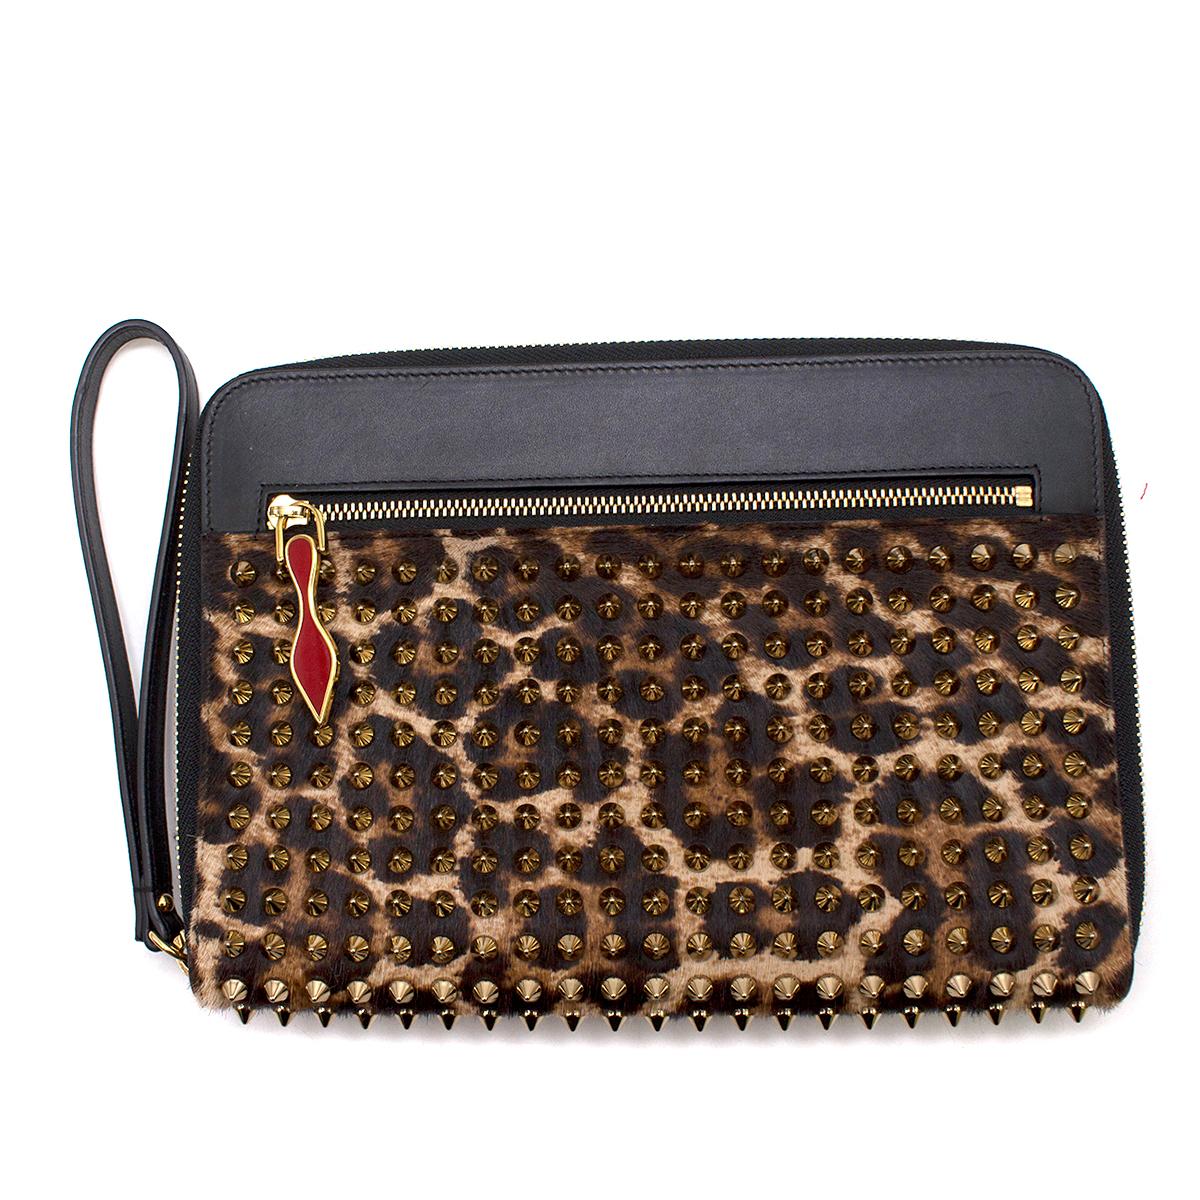 Christian Louboutin Spike document holder

- Tonal-brown leopard print, calf hair 
- Black smooth leather front panel 
- Gold-tone metal spike embellished 
- front zip-fastening pocket, signature red lacquered shoe zip pull
- Zip around closure,